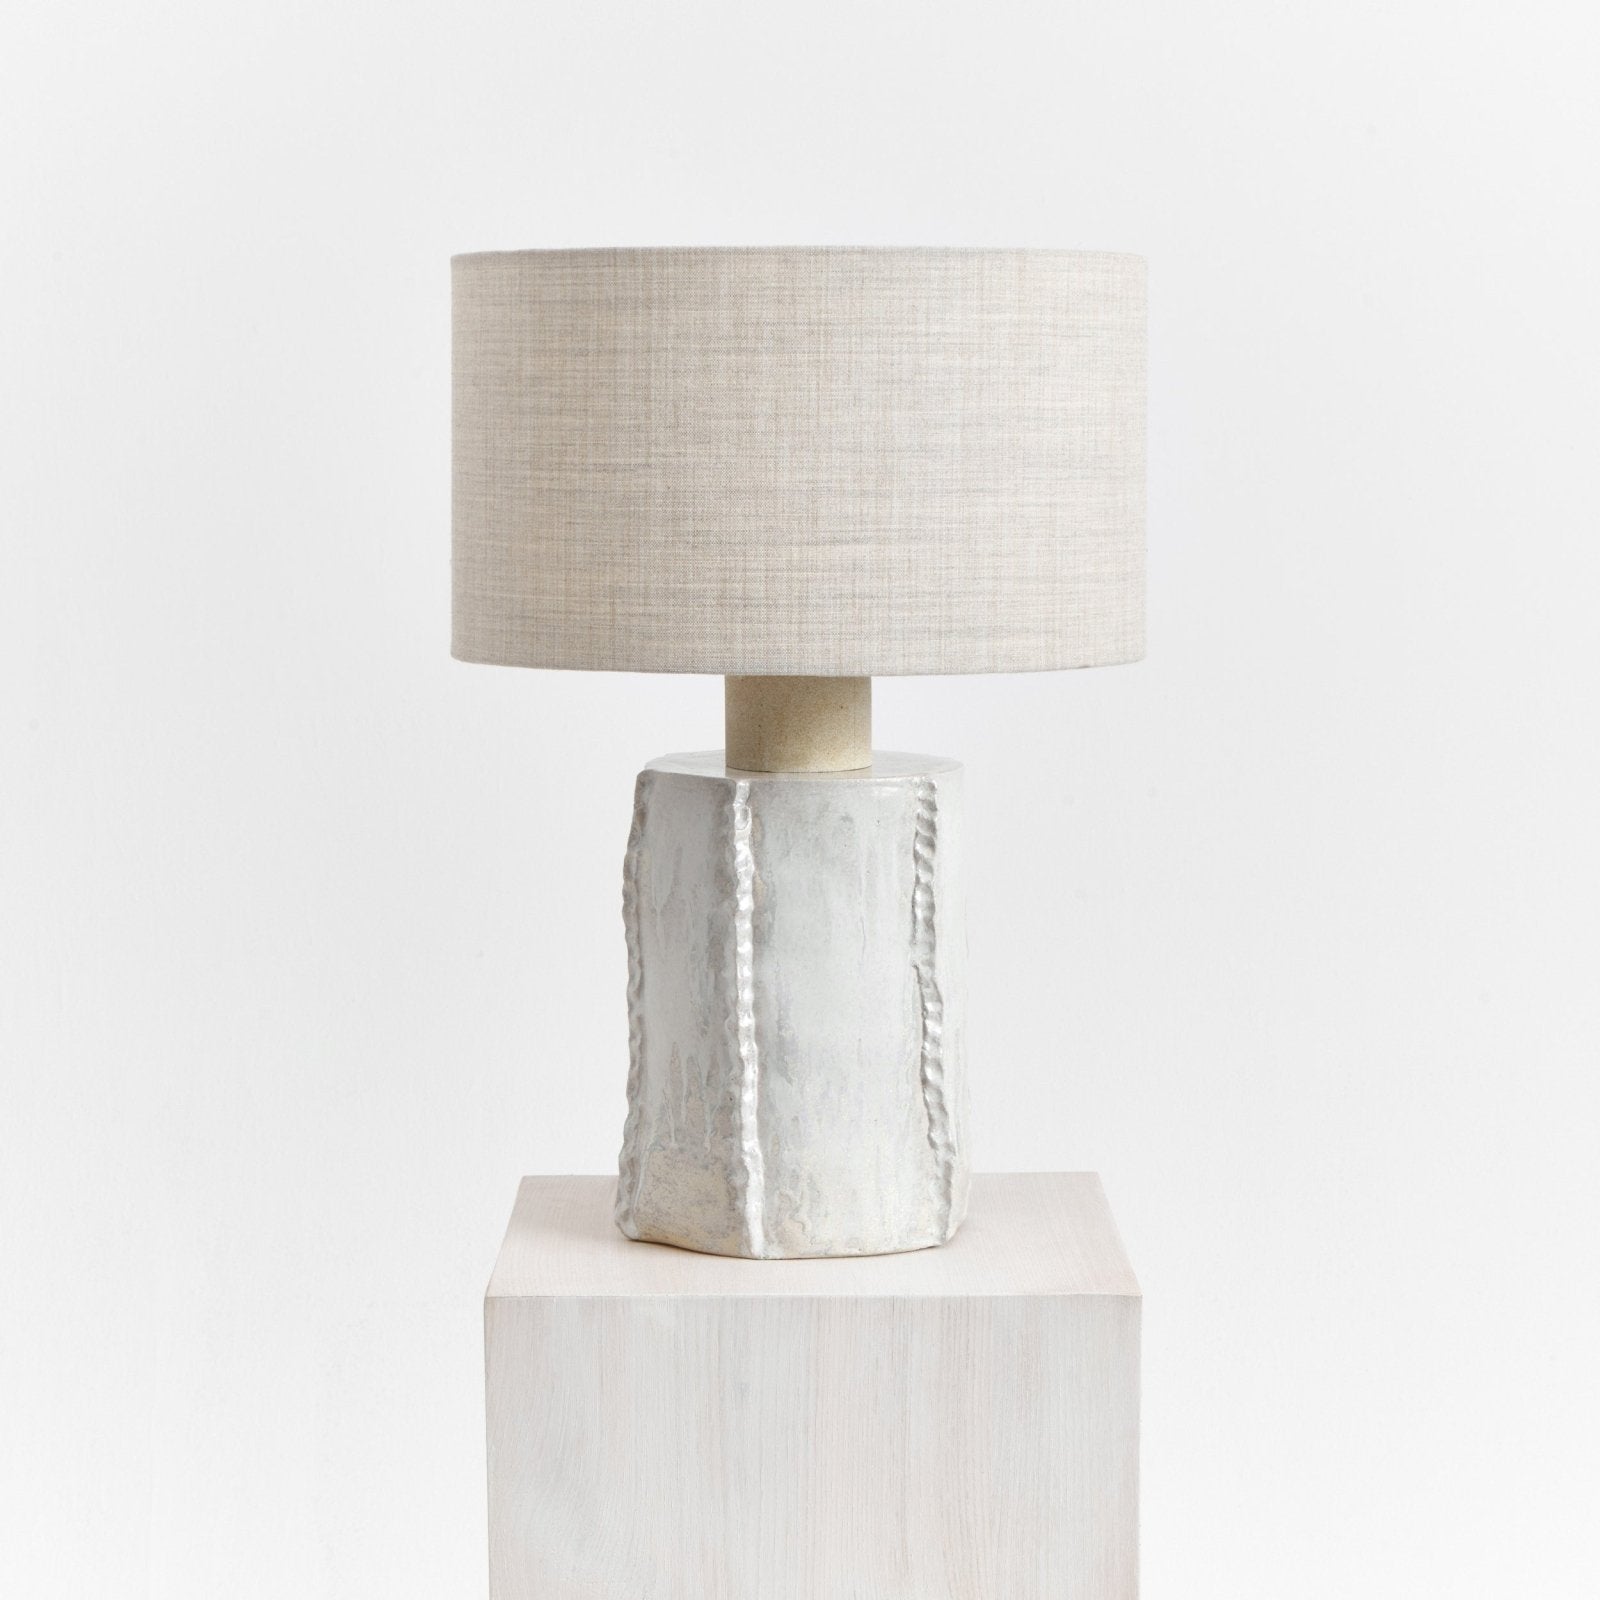 Totem - Table lamp Accessories by Project 213A